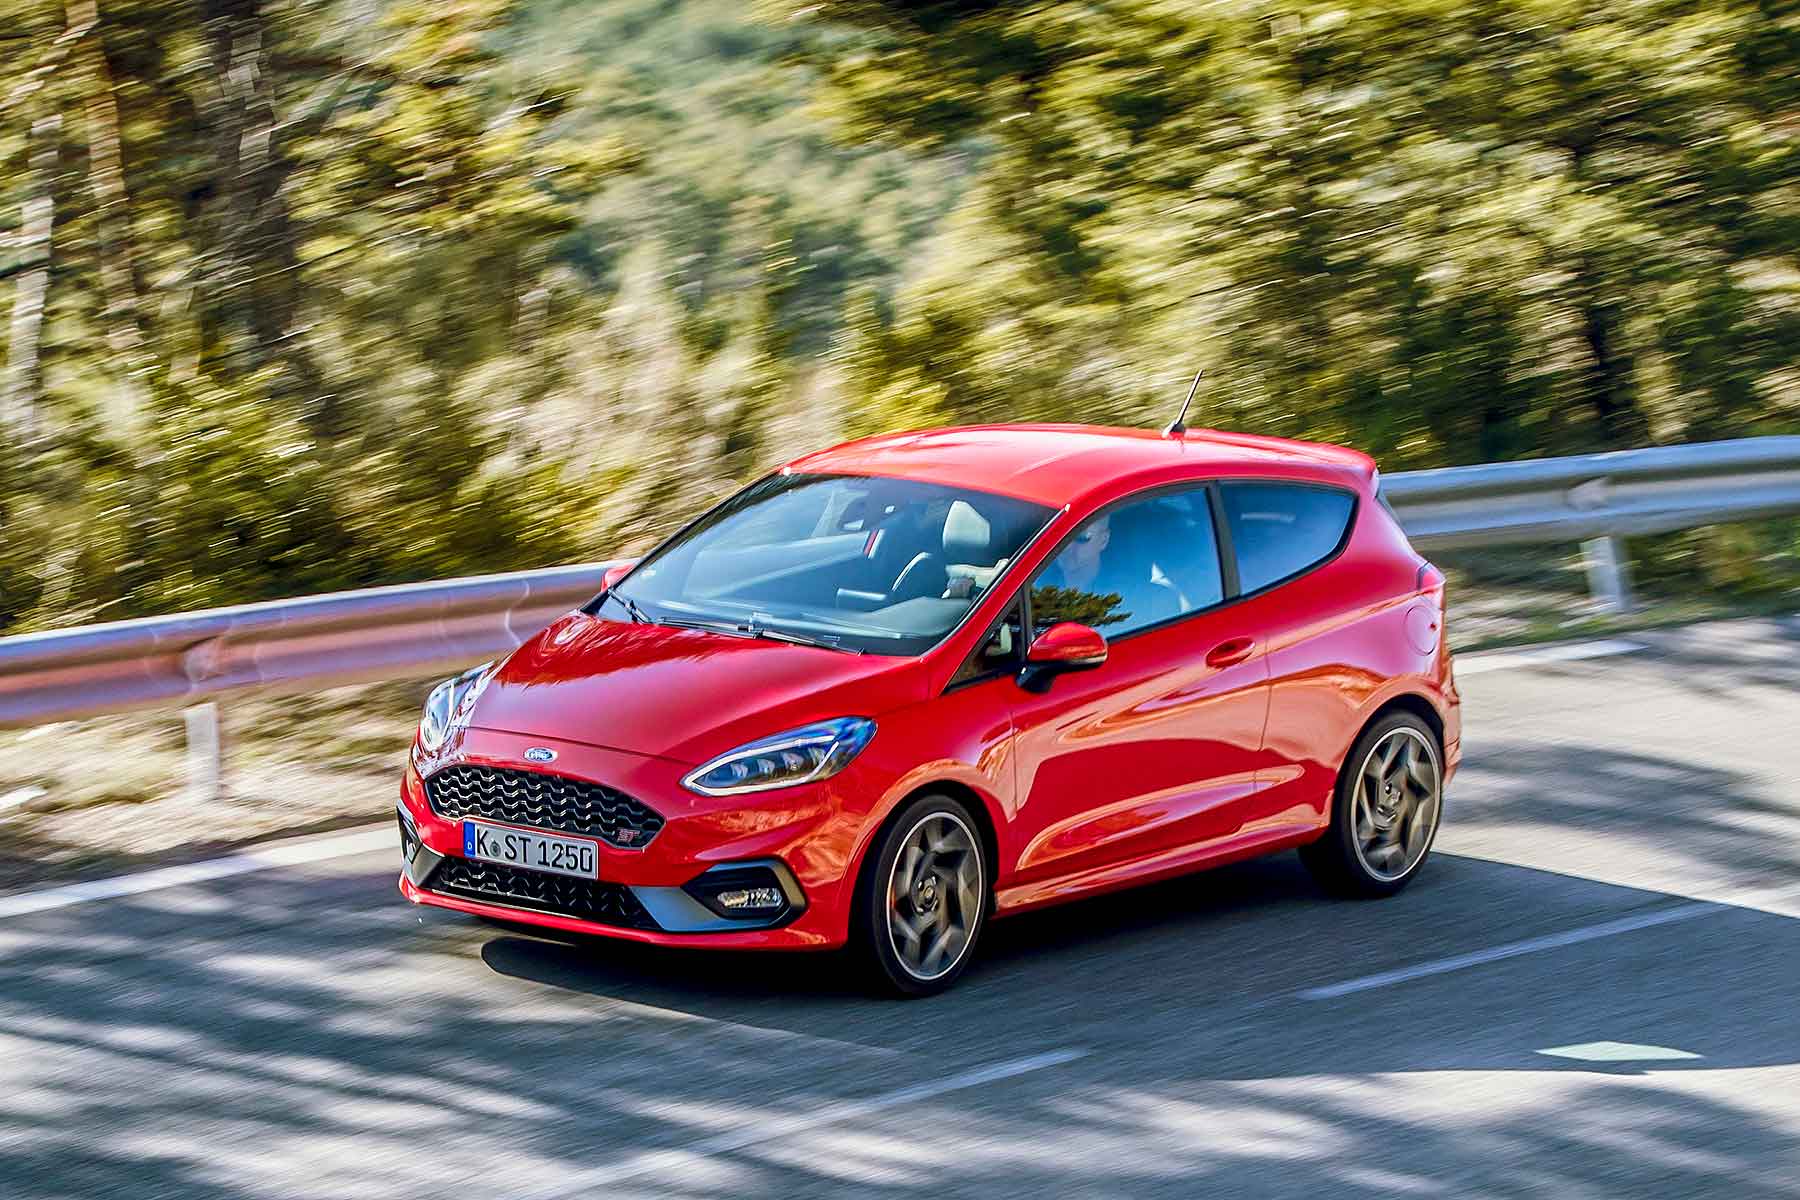 2018 Ford Fiesta ST in Race Red